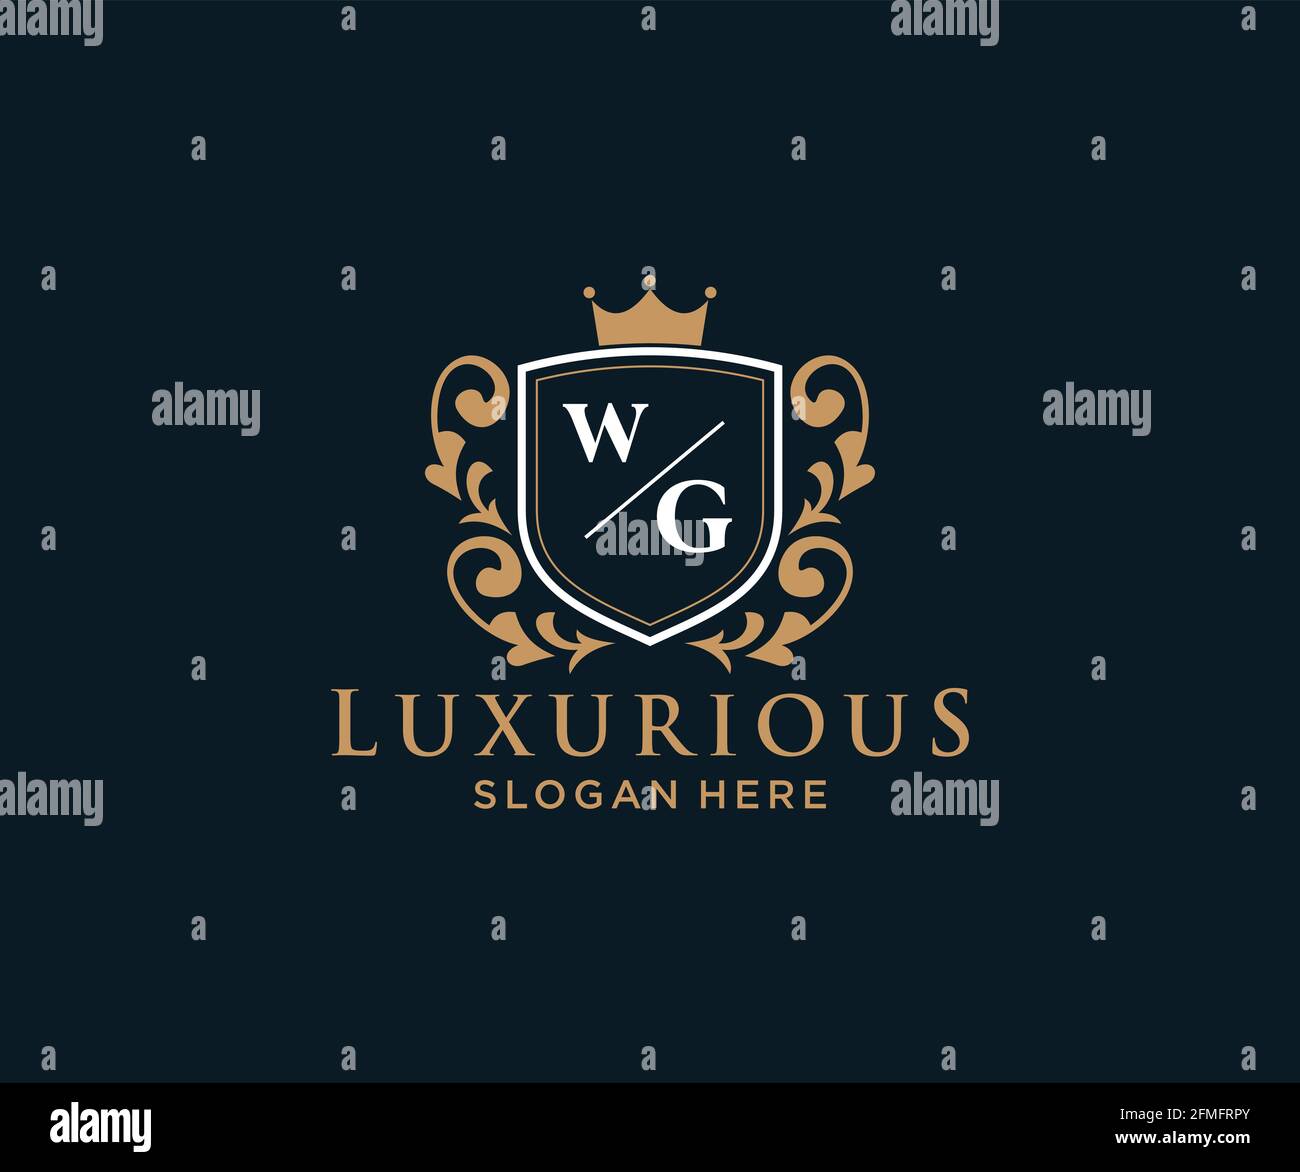 WG Letter Royal Luxury Logo template in vector art for Restaurant, Royalty, Boutique, Cafe, Hotel, Heraldic, Jewelry, Fashion and other vector illustr Stock Vector